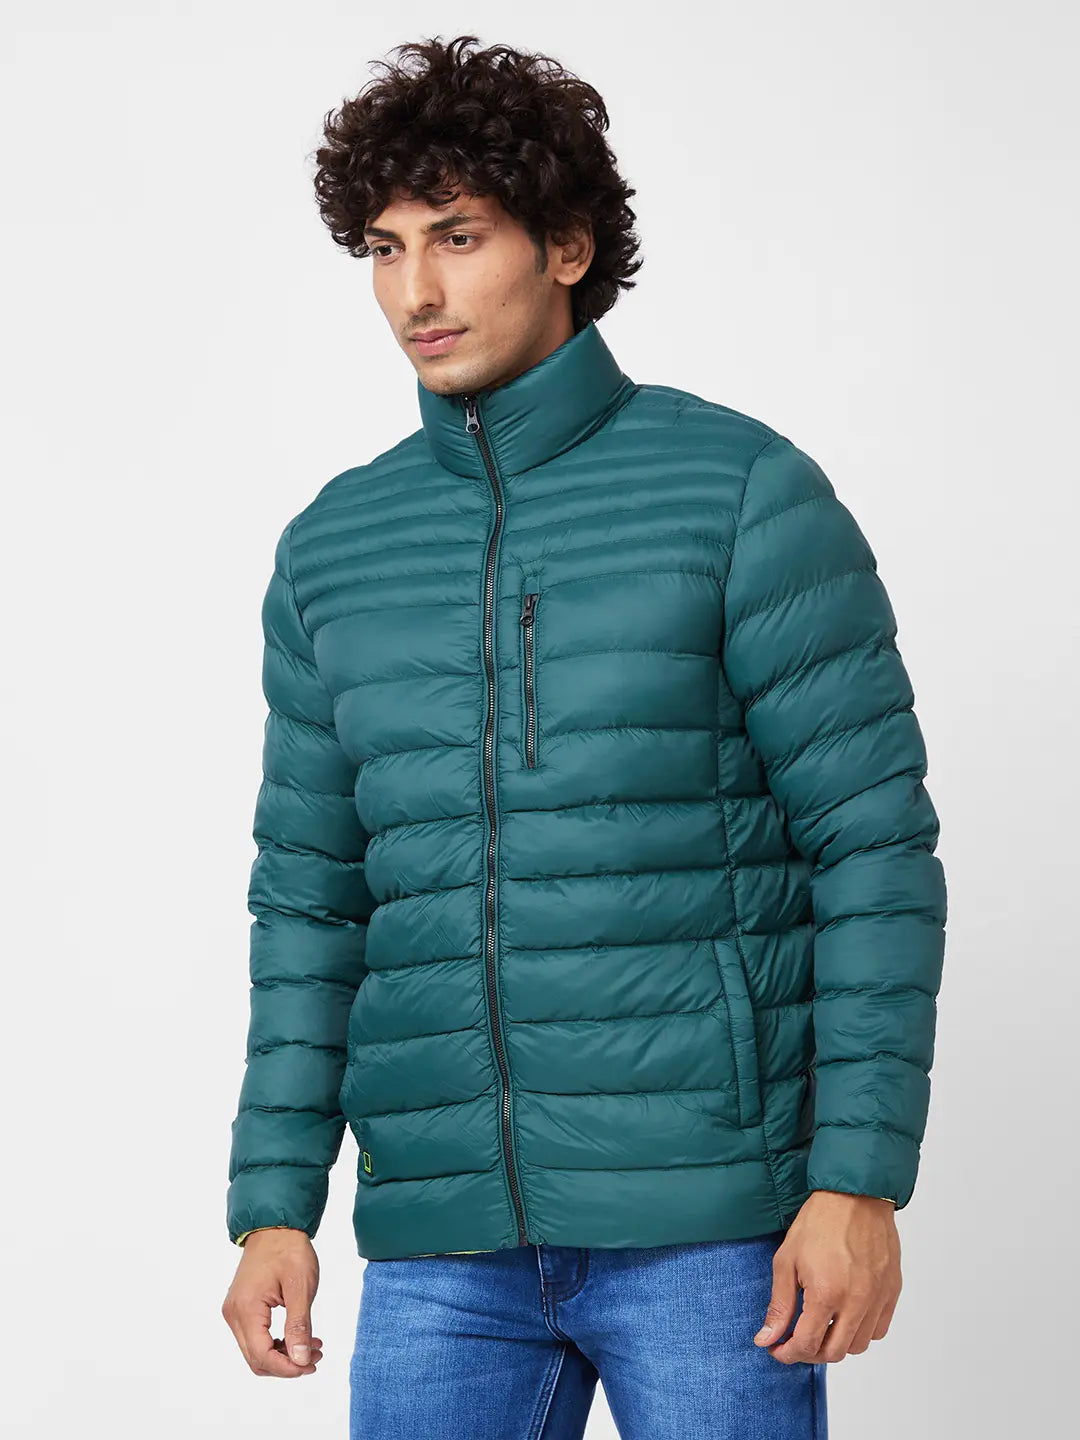 MEN'S PACKABLE PUFFER JACKET WITH BRANDED PRINT ON NECK